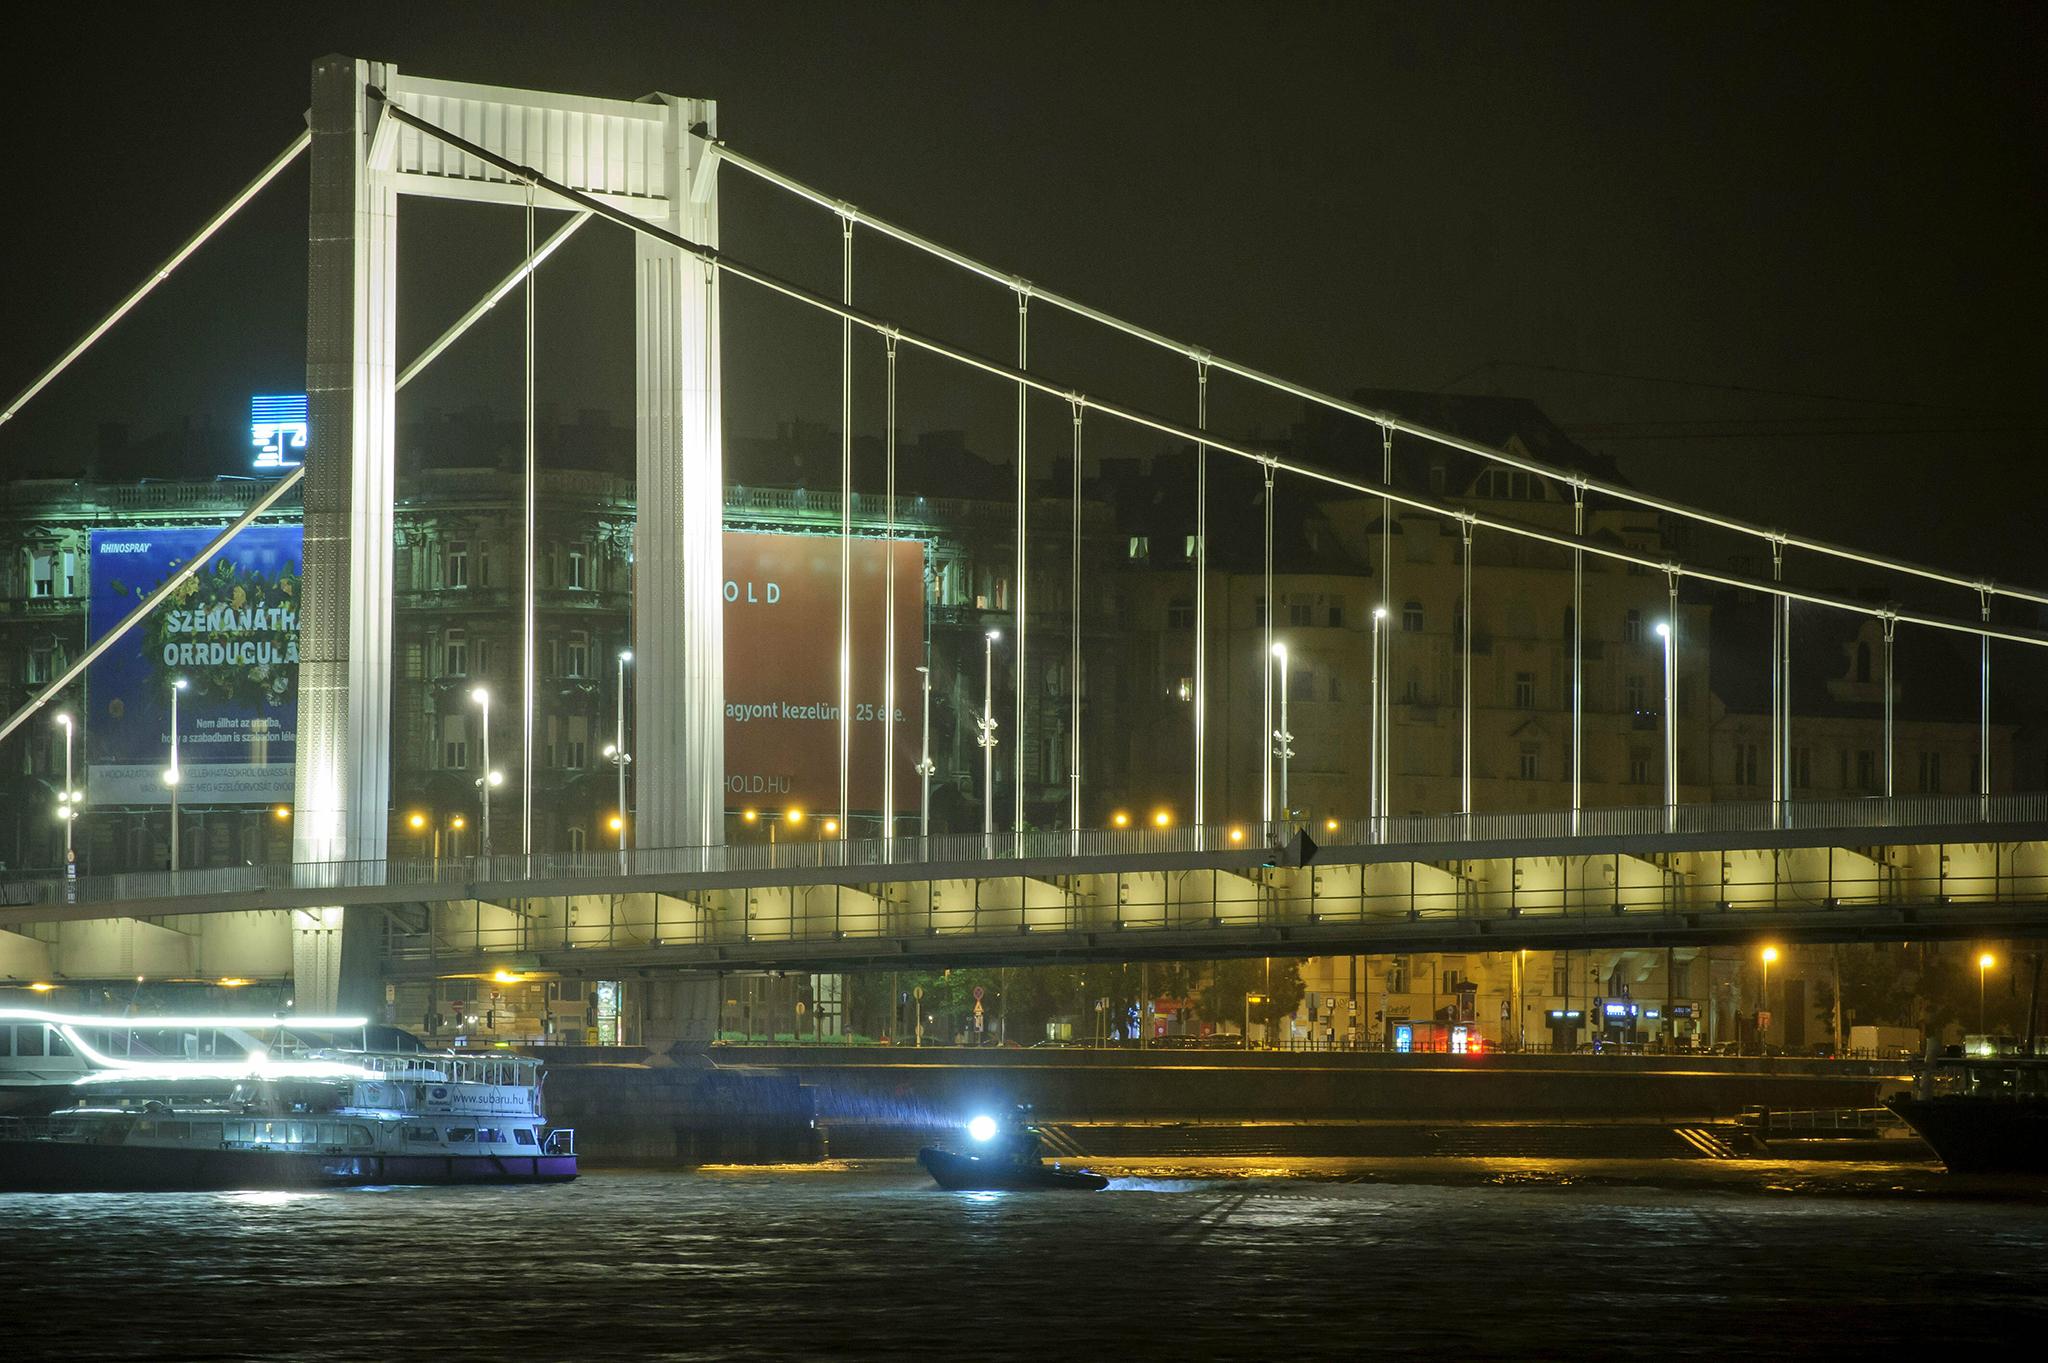 The tourist boat Hableany was overtaken from behind by the much larger cruise boat, Viking Sigyn, beneath Budapest’s Margit Bridge, in May 2019